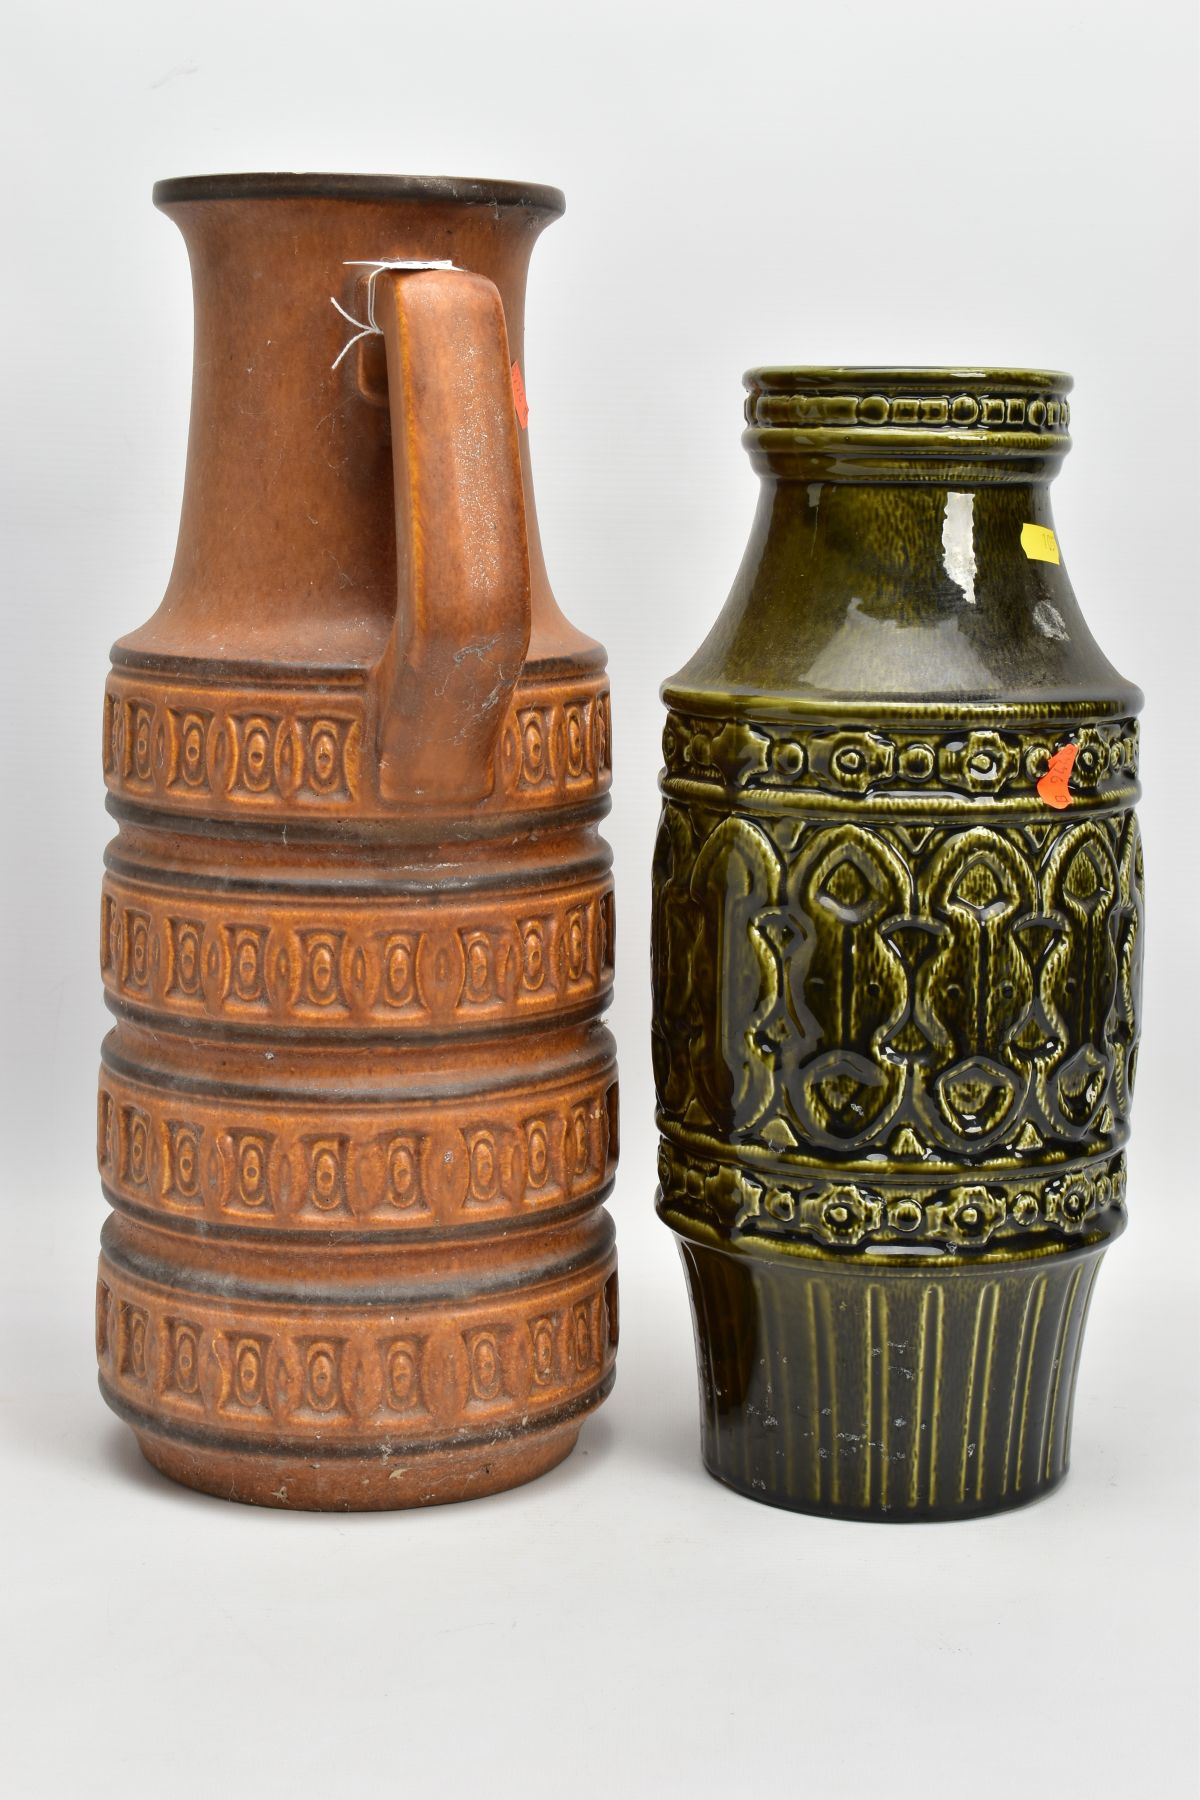 A WEST GERMAN POTTERY JUG WITH AN ART POTTERY VASE, the West German jug measuring 45cm high, being - Image 2 of 6